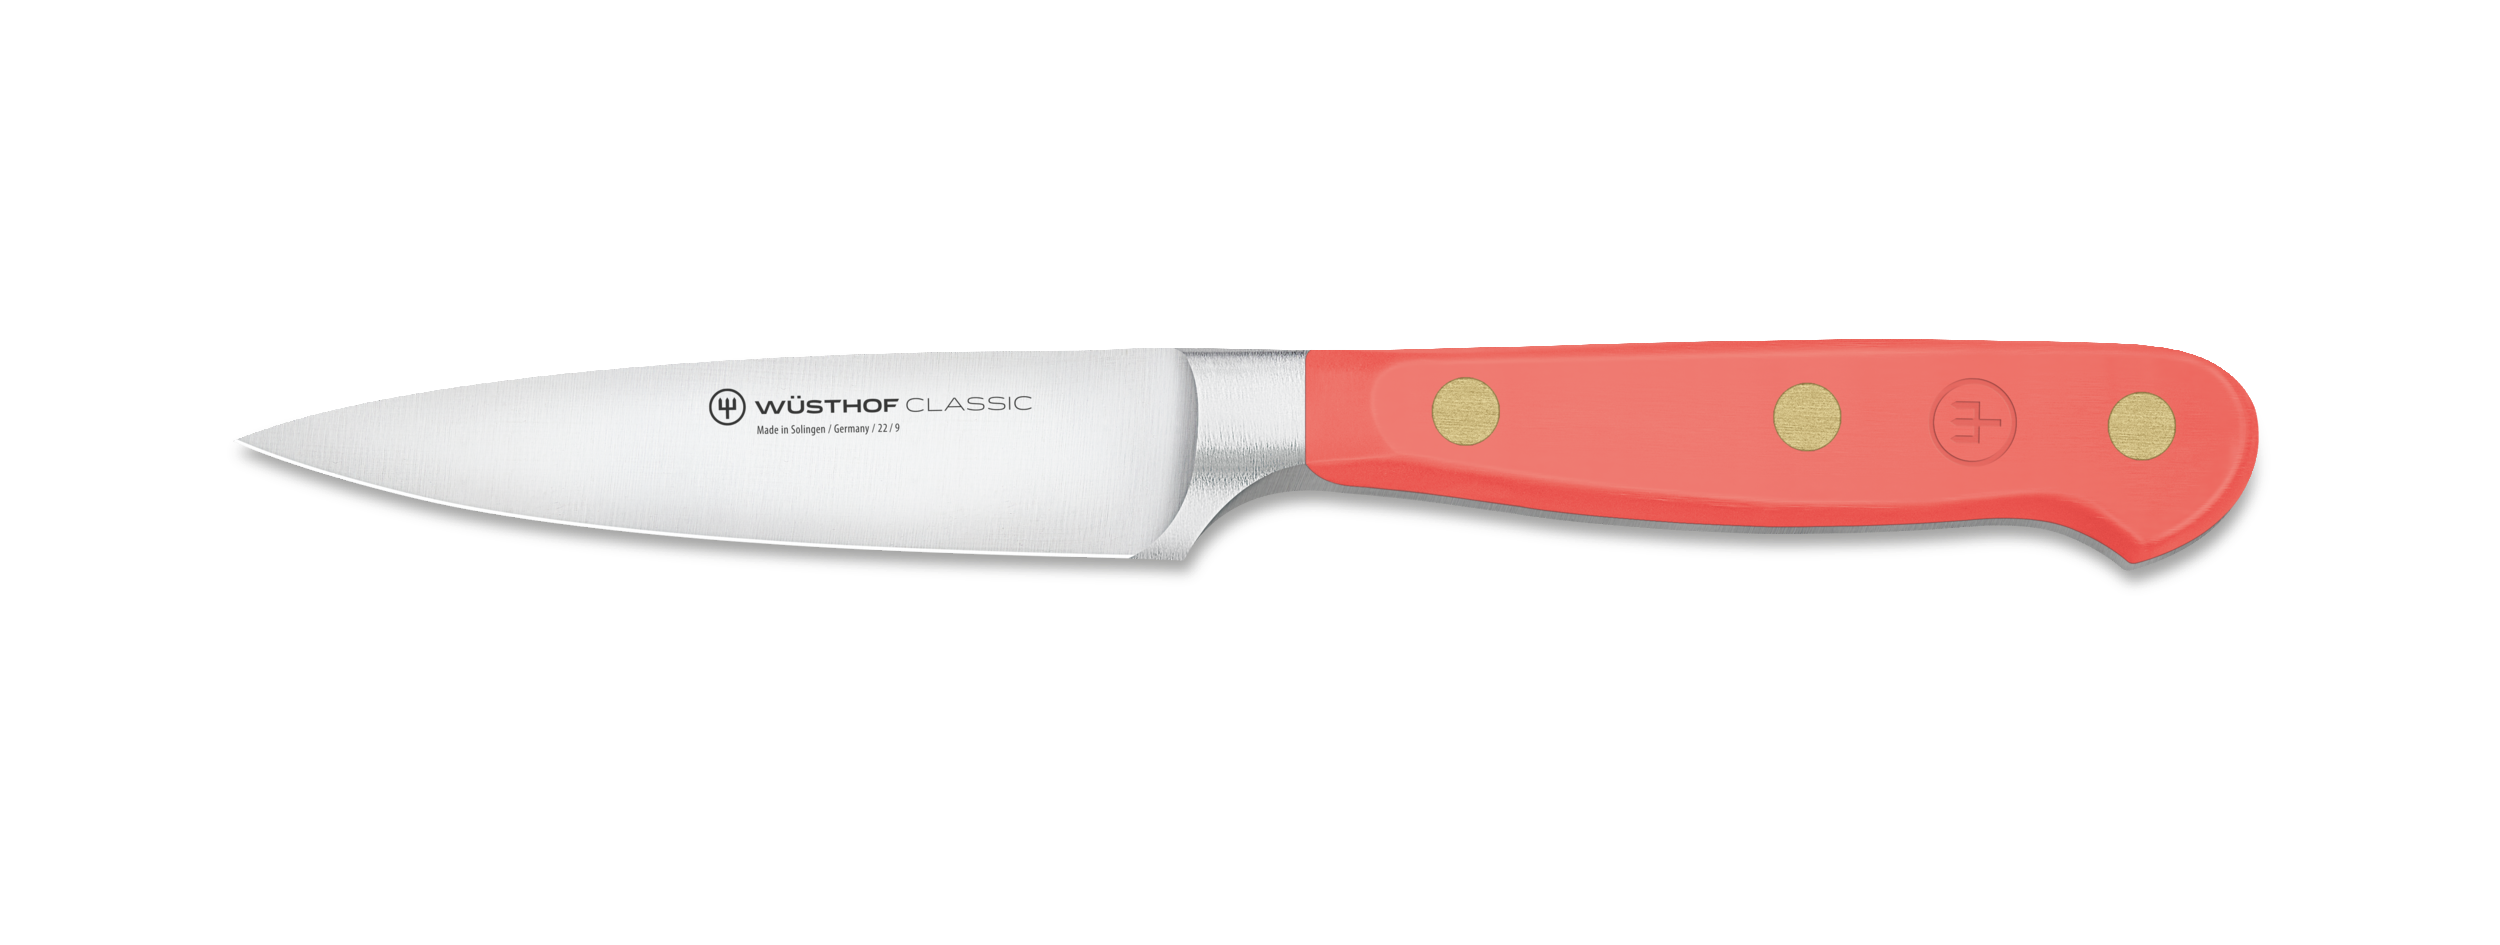 Meet the official knife of BBQ: the #WUSTHOF Classic Craftsman 🔪 #bbq